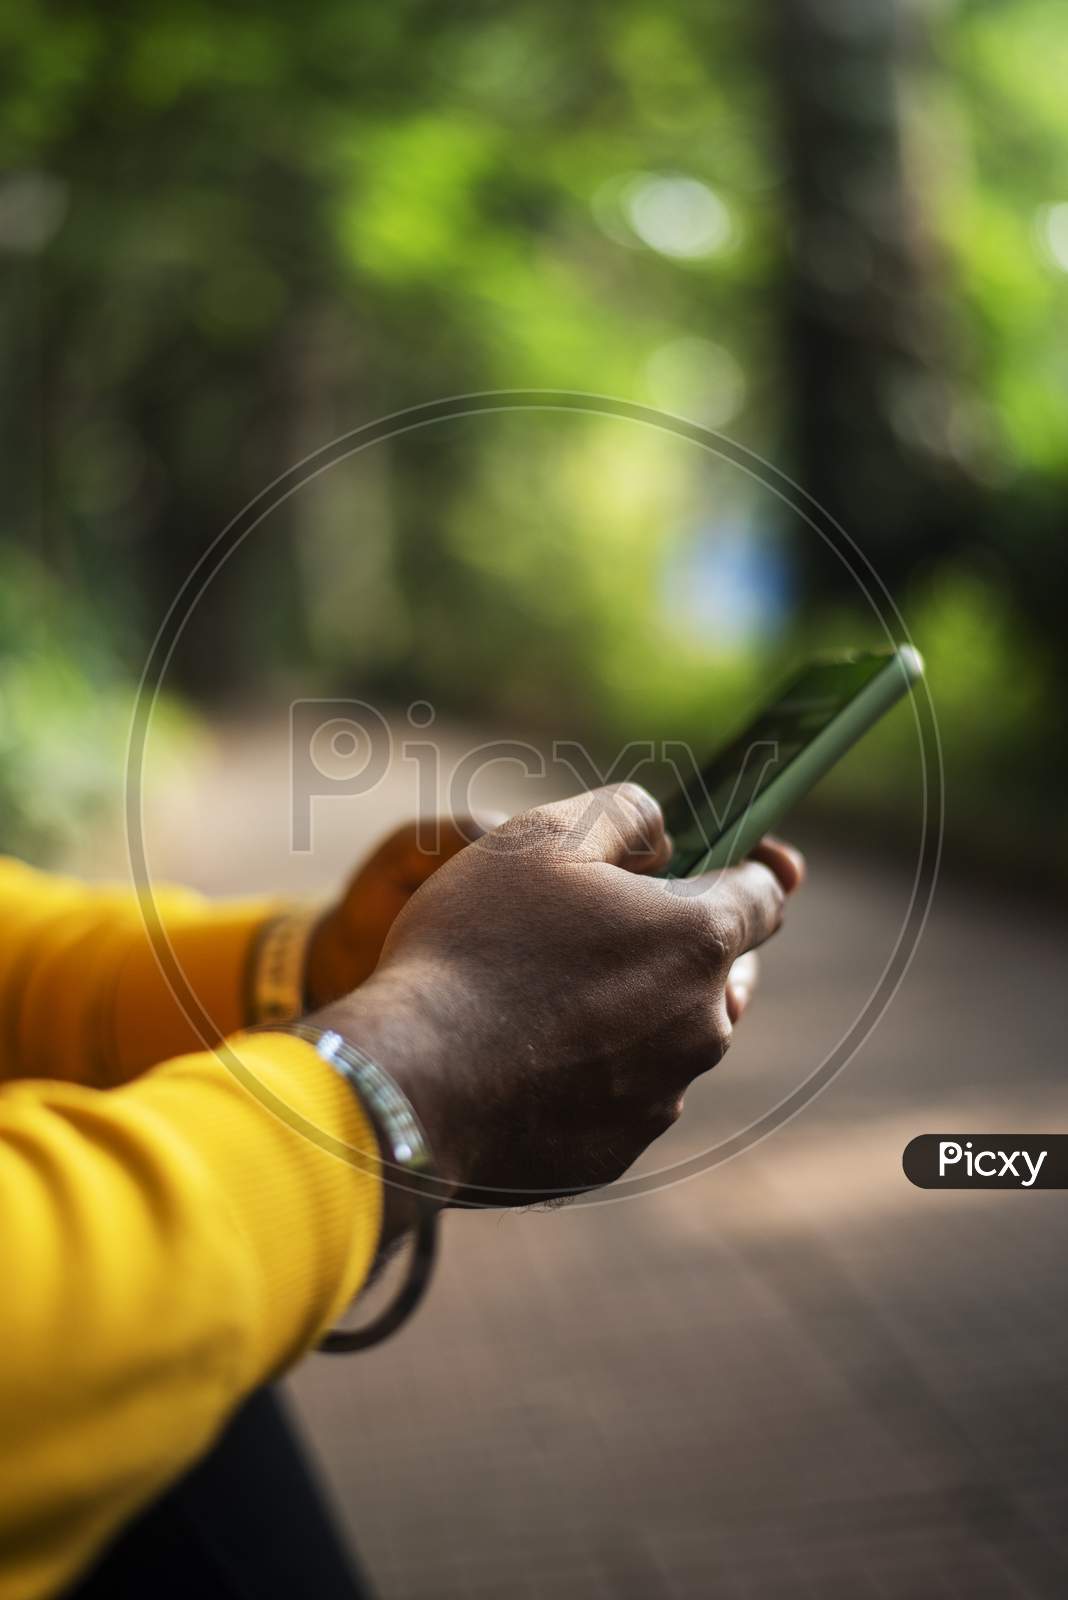 a person using a smartphone on green bokeh background, male hand holding a smartphone